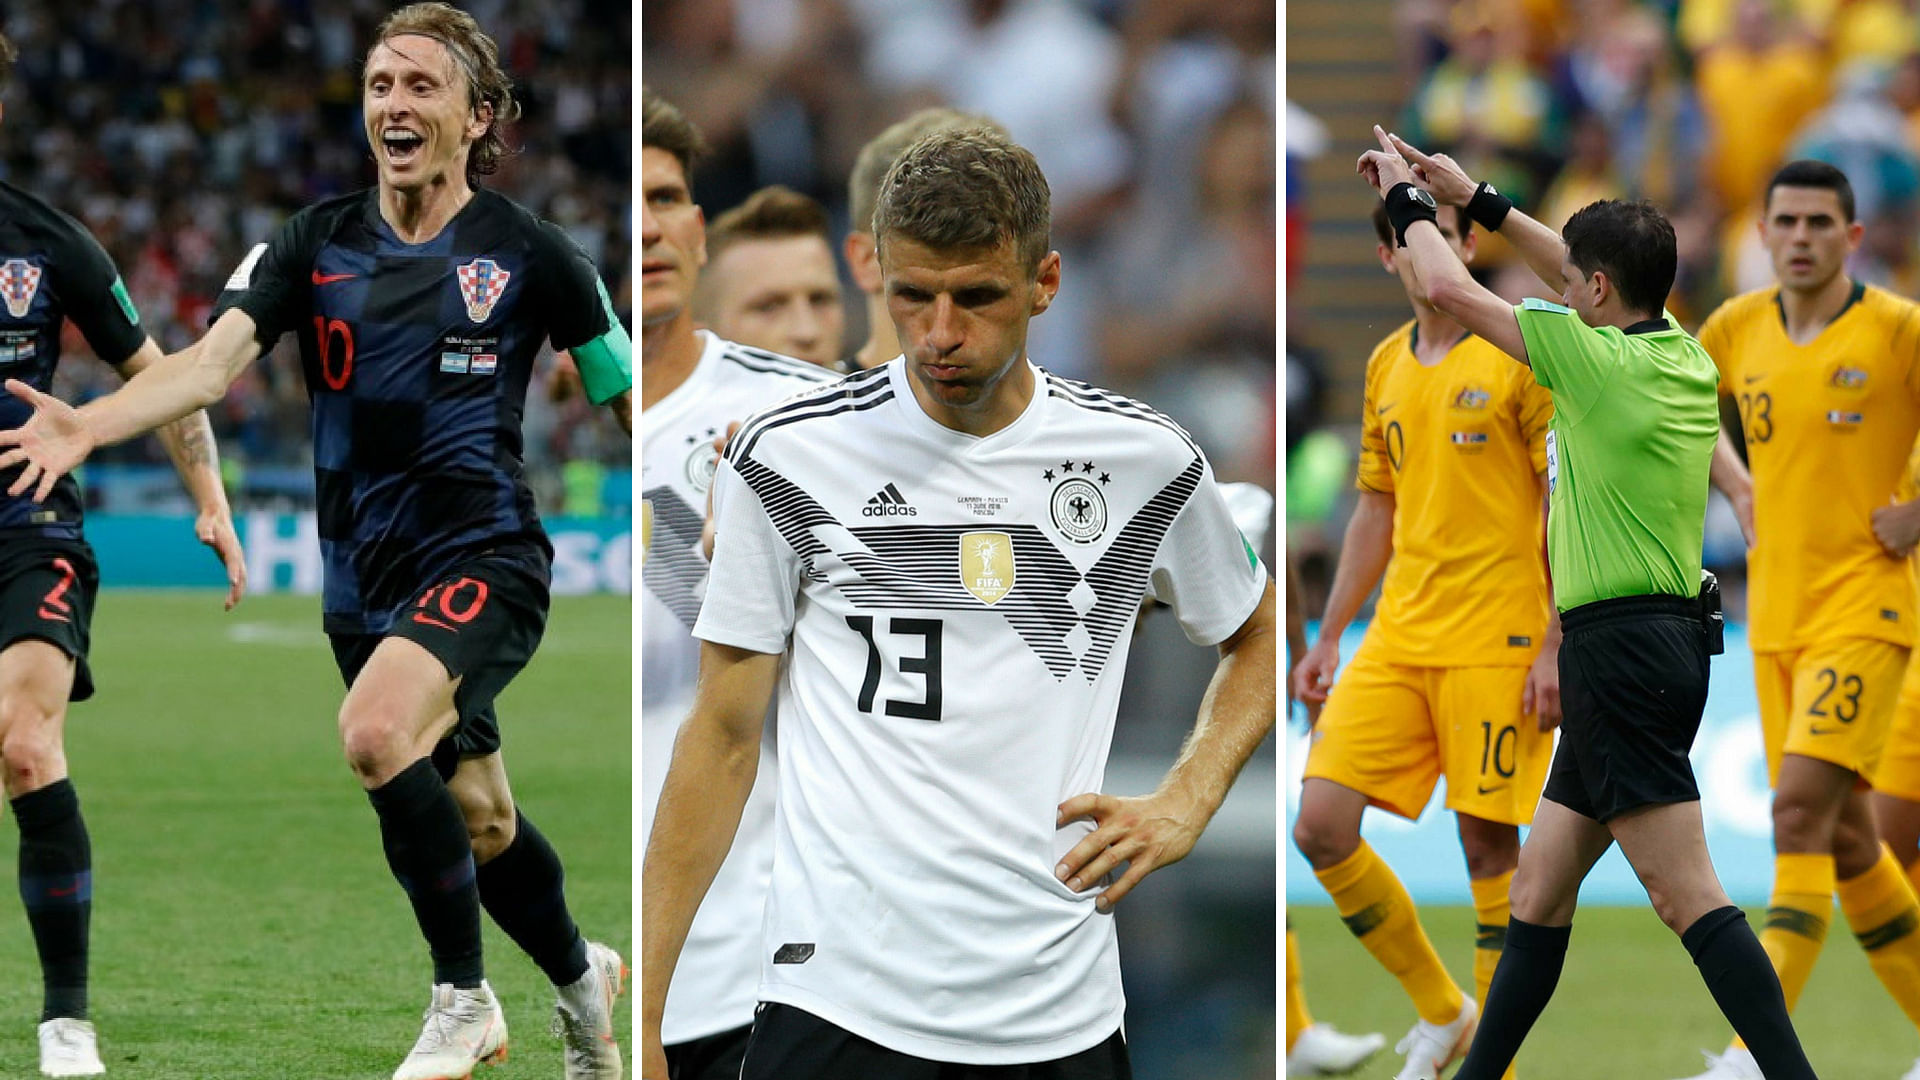 Some remarkable moments from the FIFA World Cup 2018.